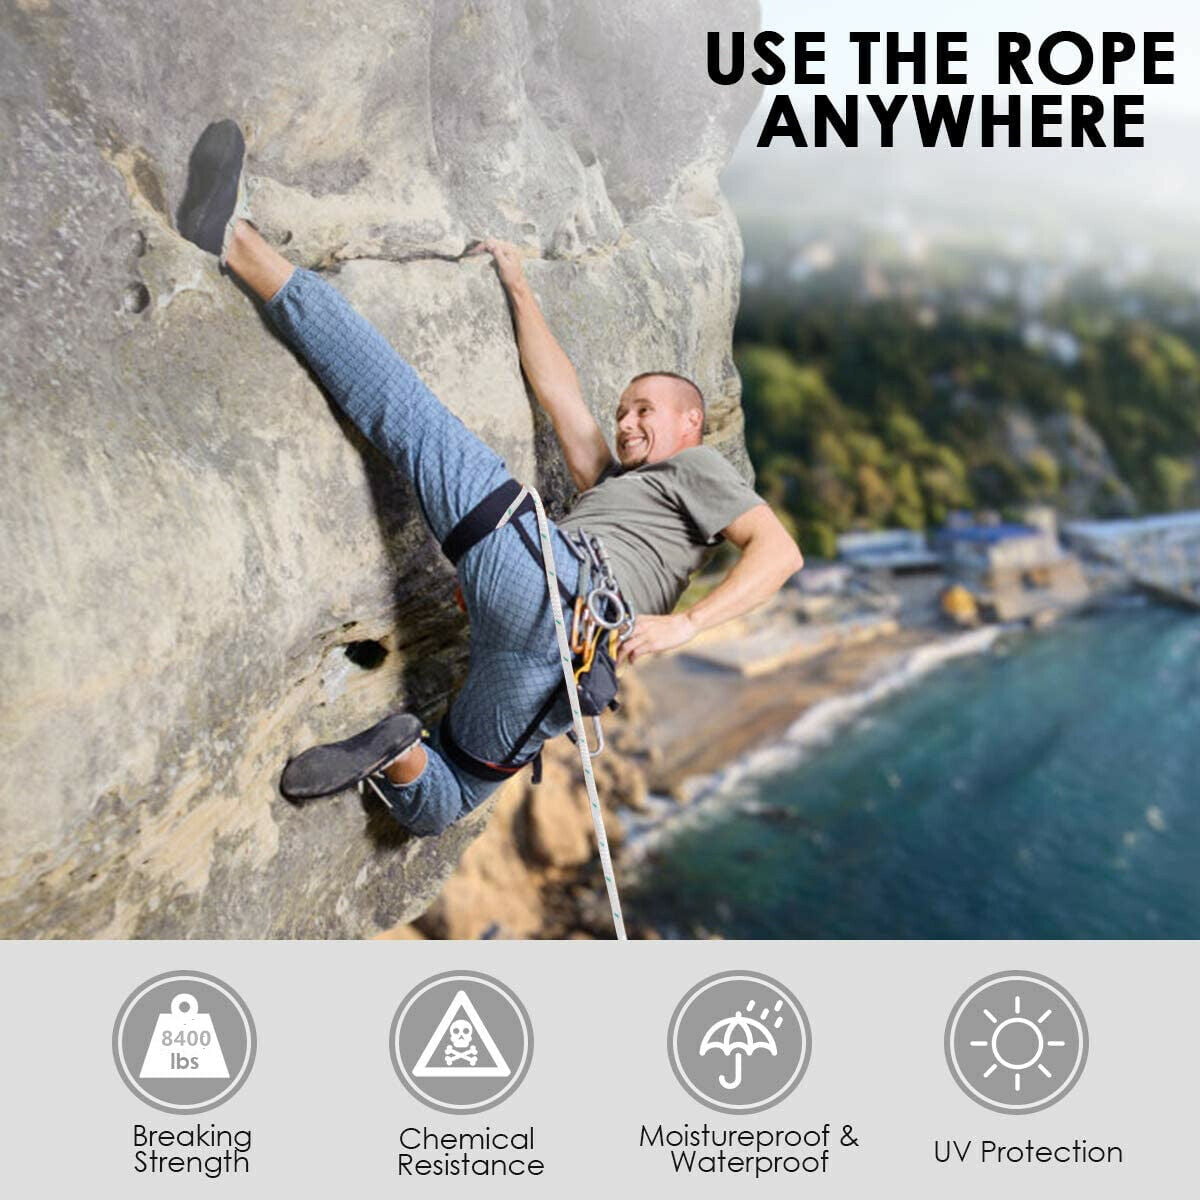 Details about  / 0.55/" 125FT Single Side Braid Rope BREAKING STRENGTH Safety Climbing Rock NEW US